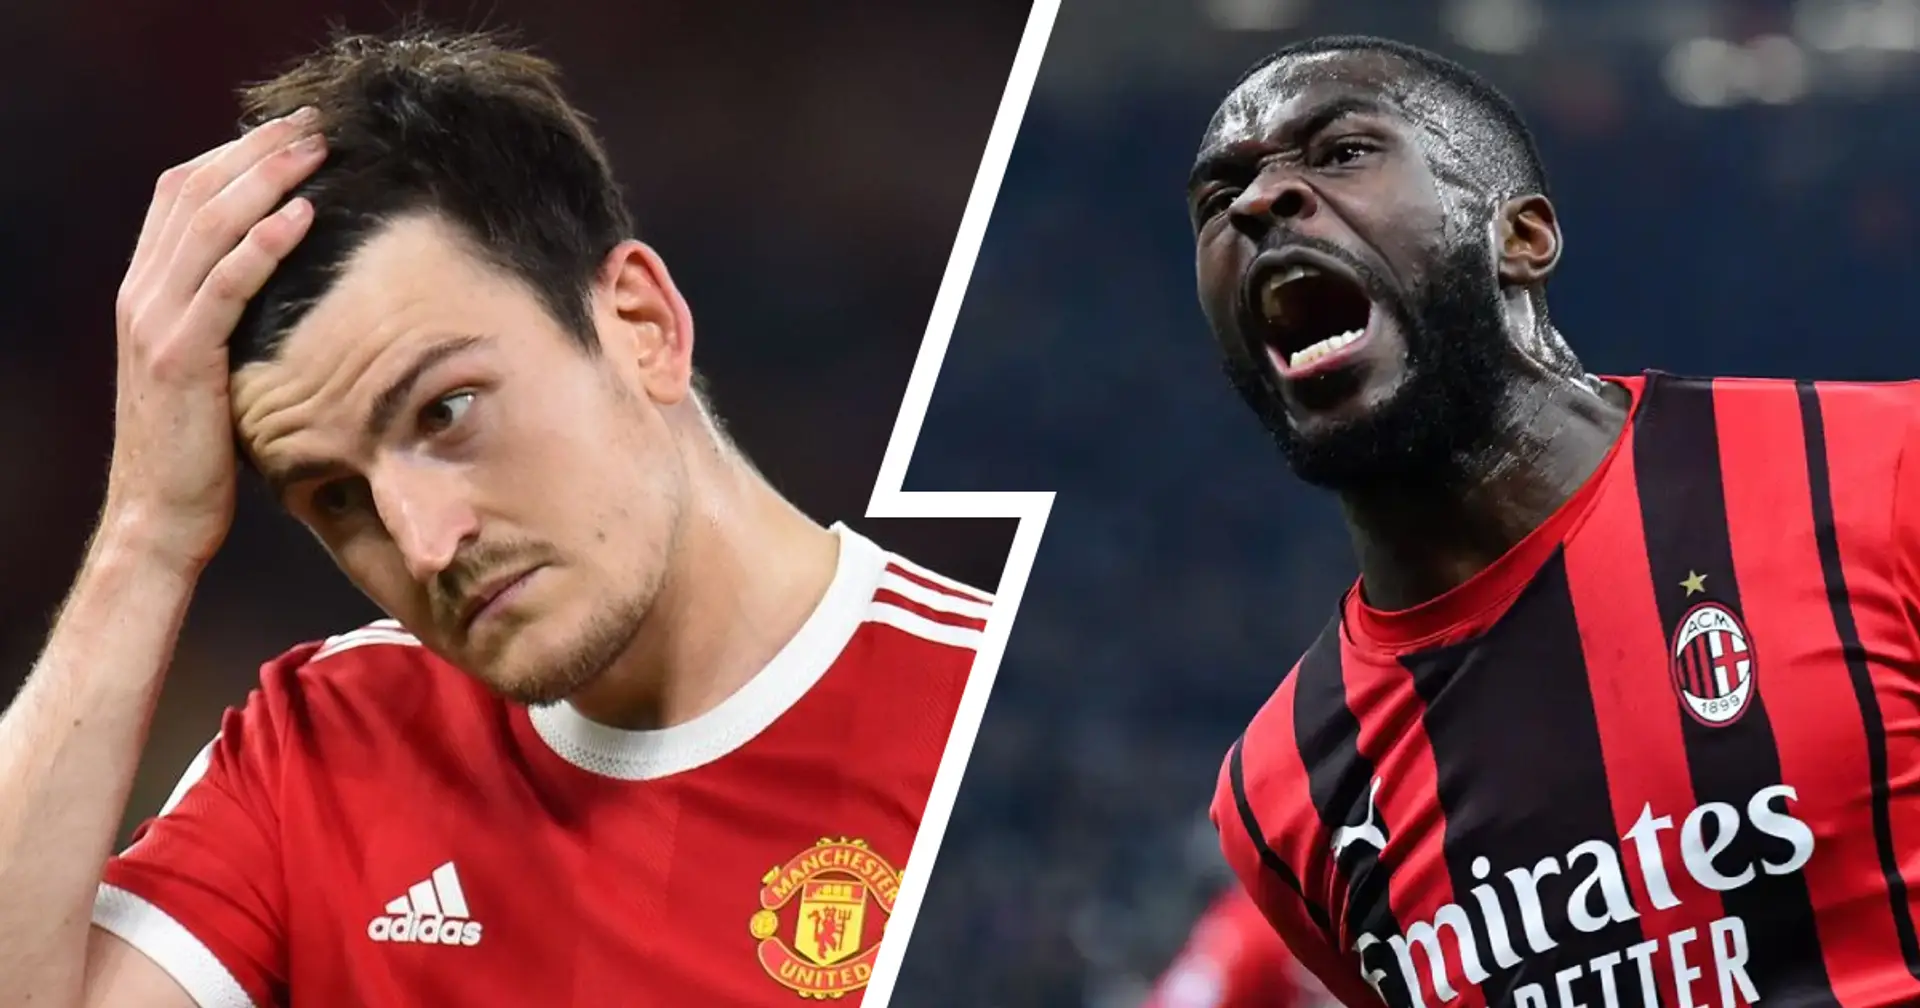 'In what stratosphere has he been better than Tomori?': Maguire's inclusion in England squad questioned